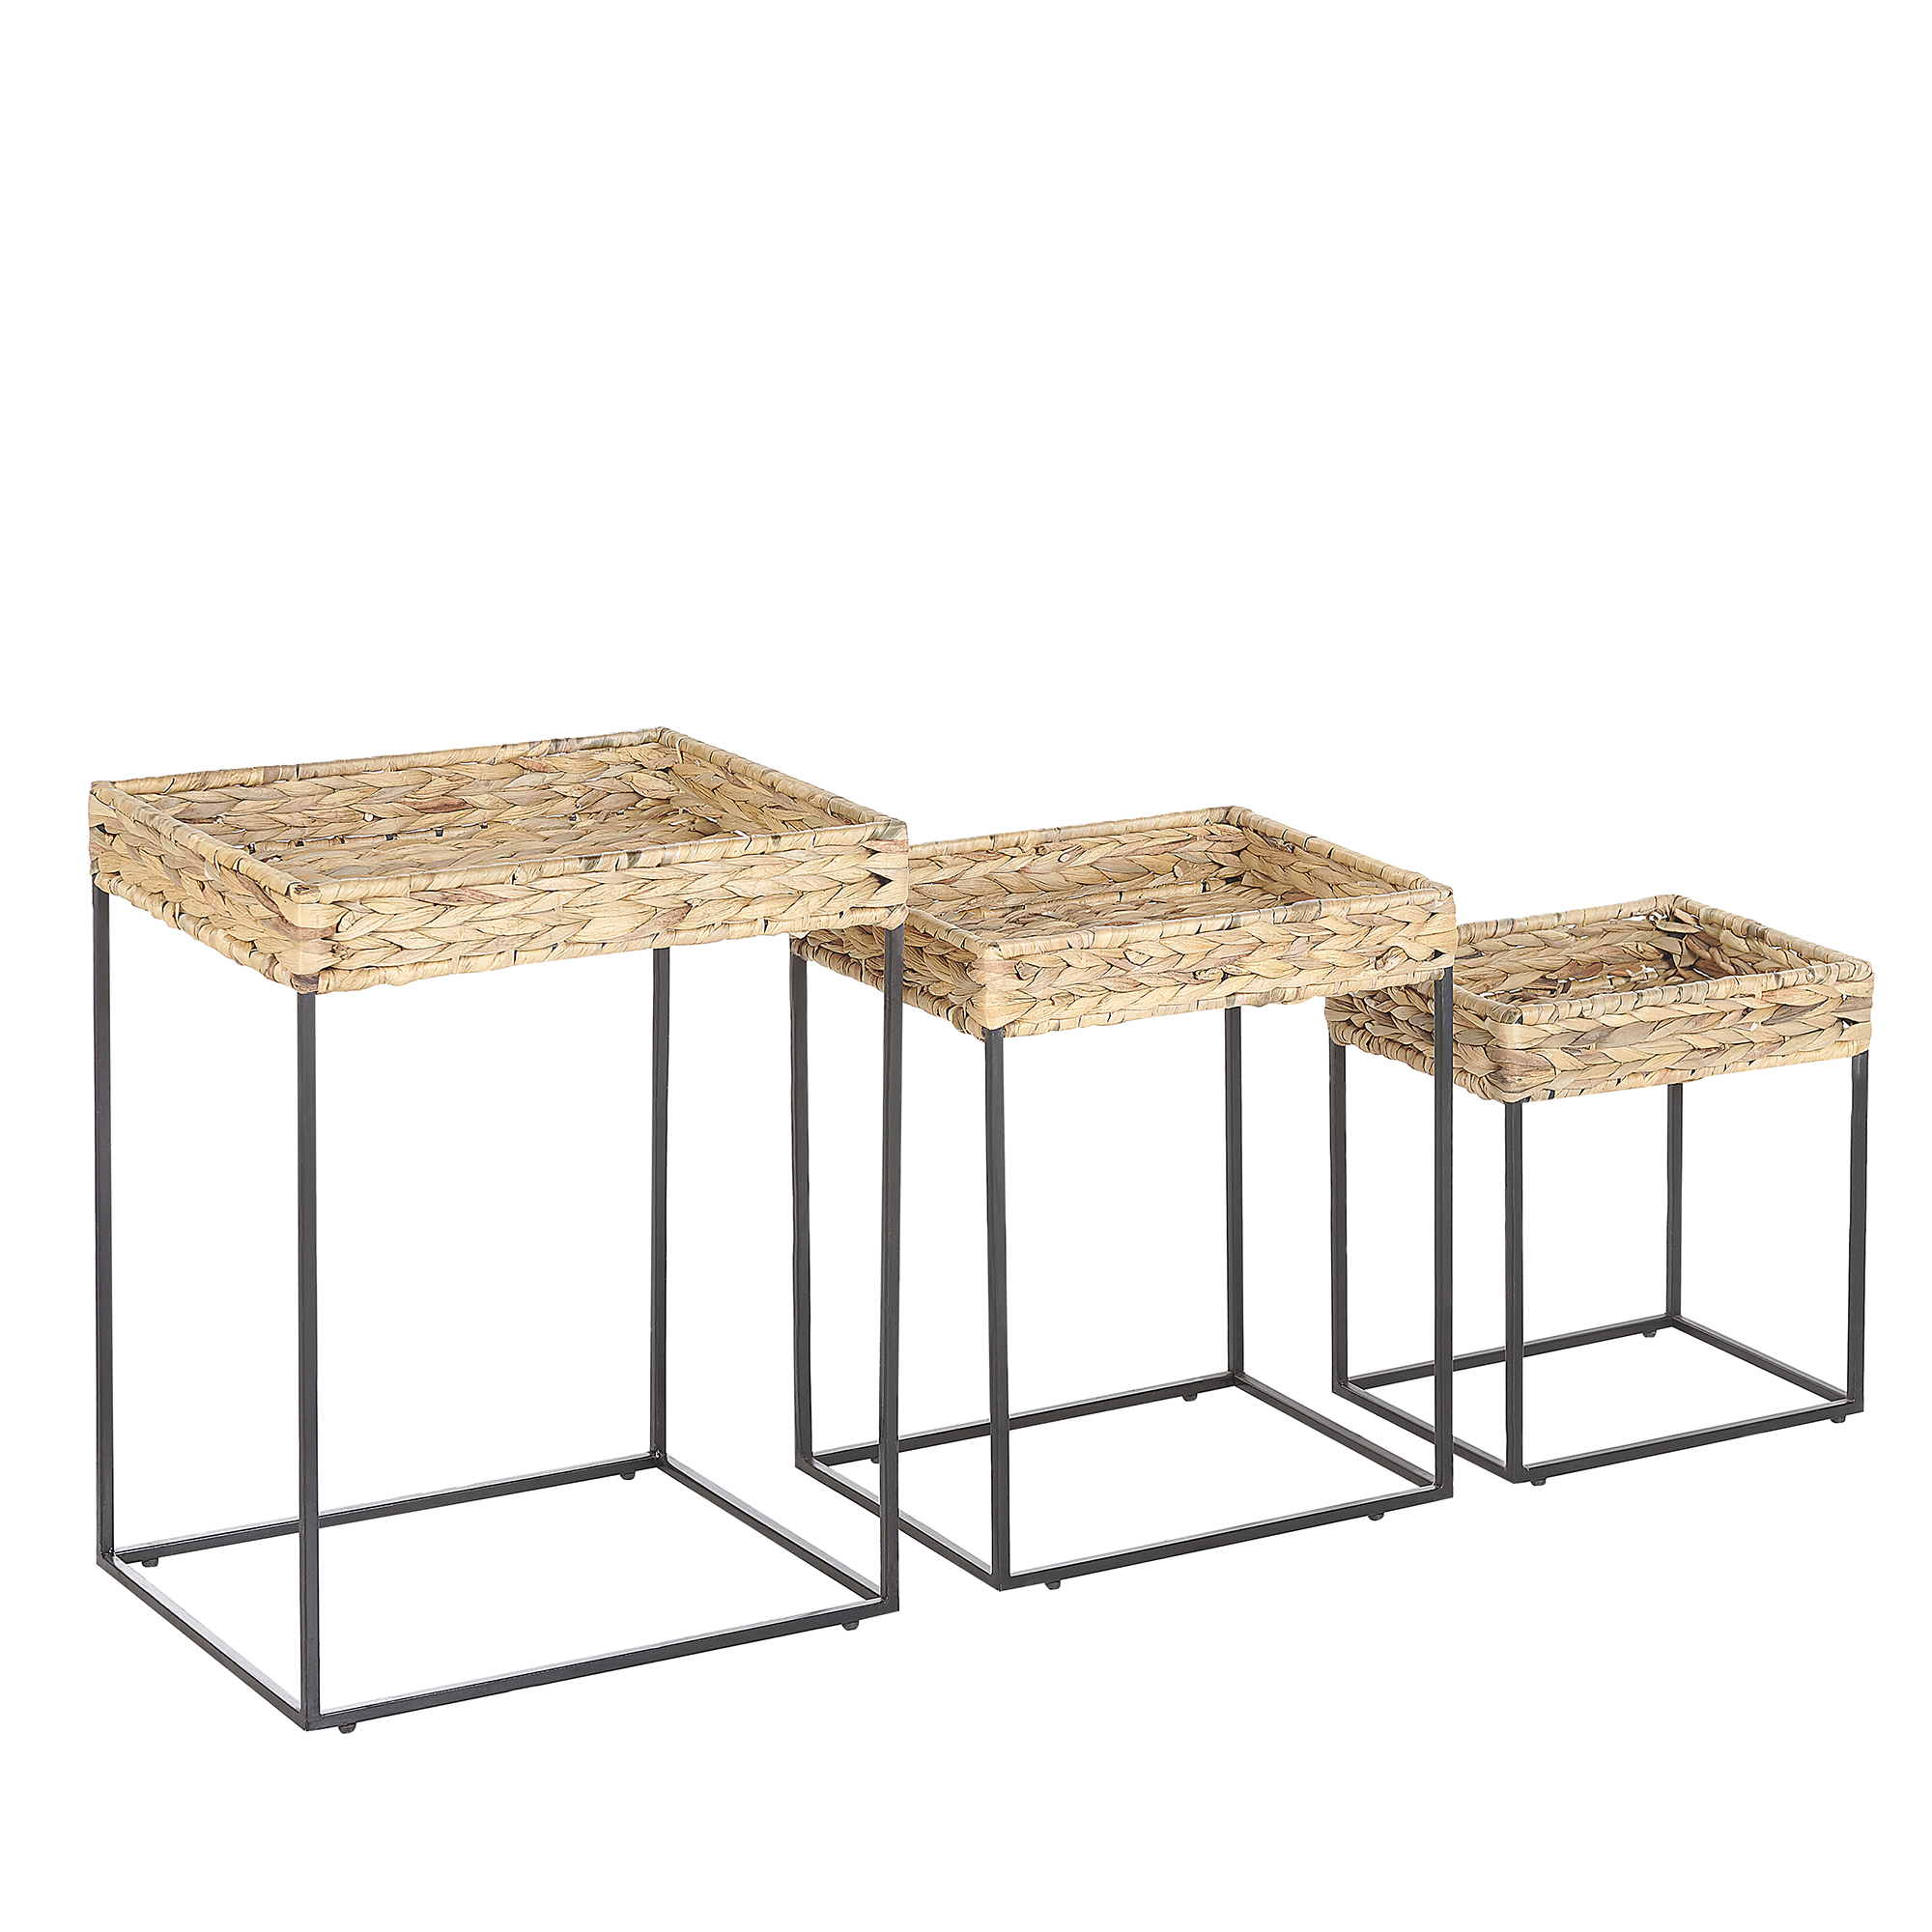 Beliani Nest of 3 Side Tables Light Wood with Black Seagrass Top Iron Frame Natural Wicker Living Room Rustic